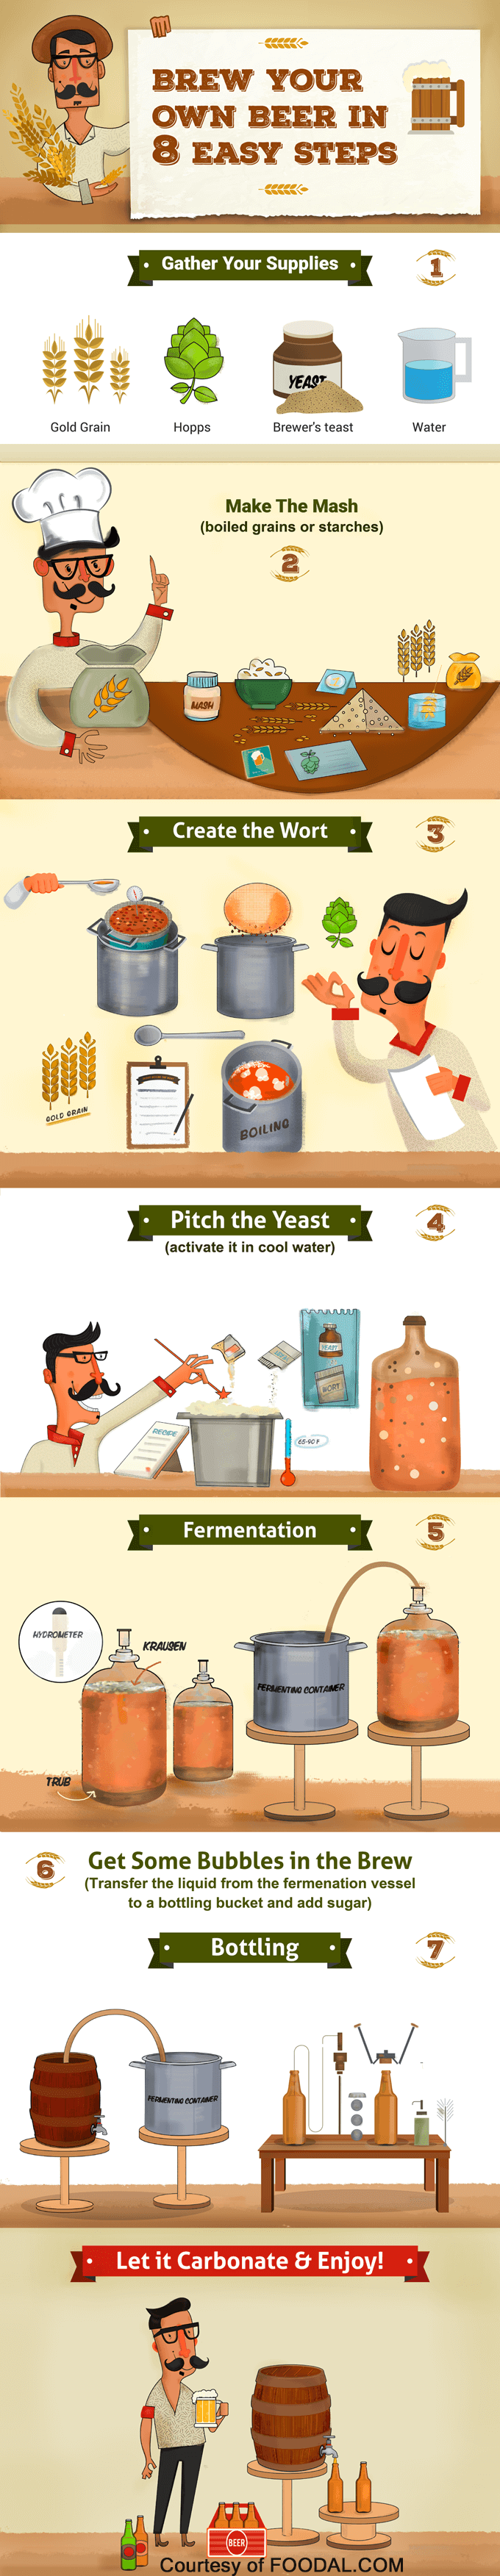 How to brew your own beer at home infograpic | Foodal.com